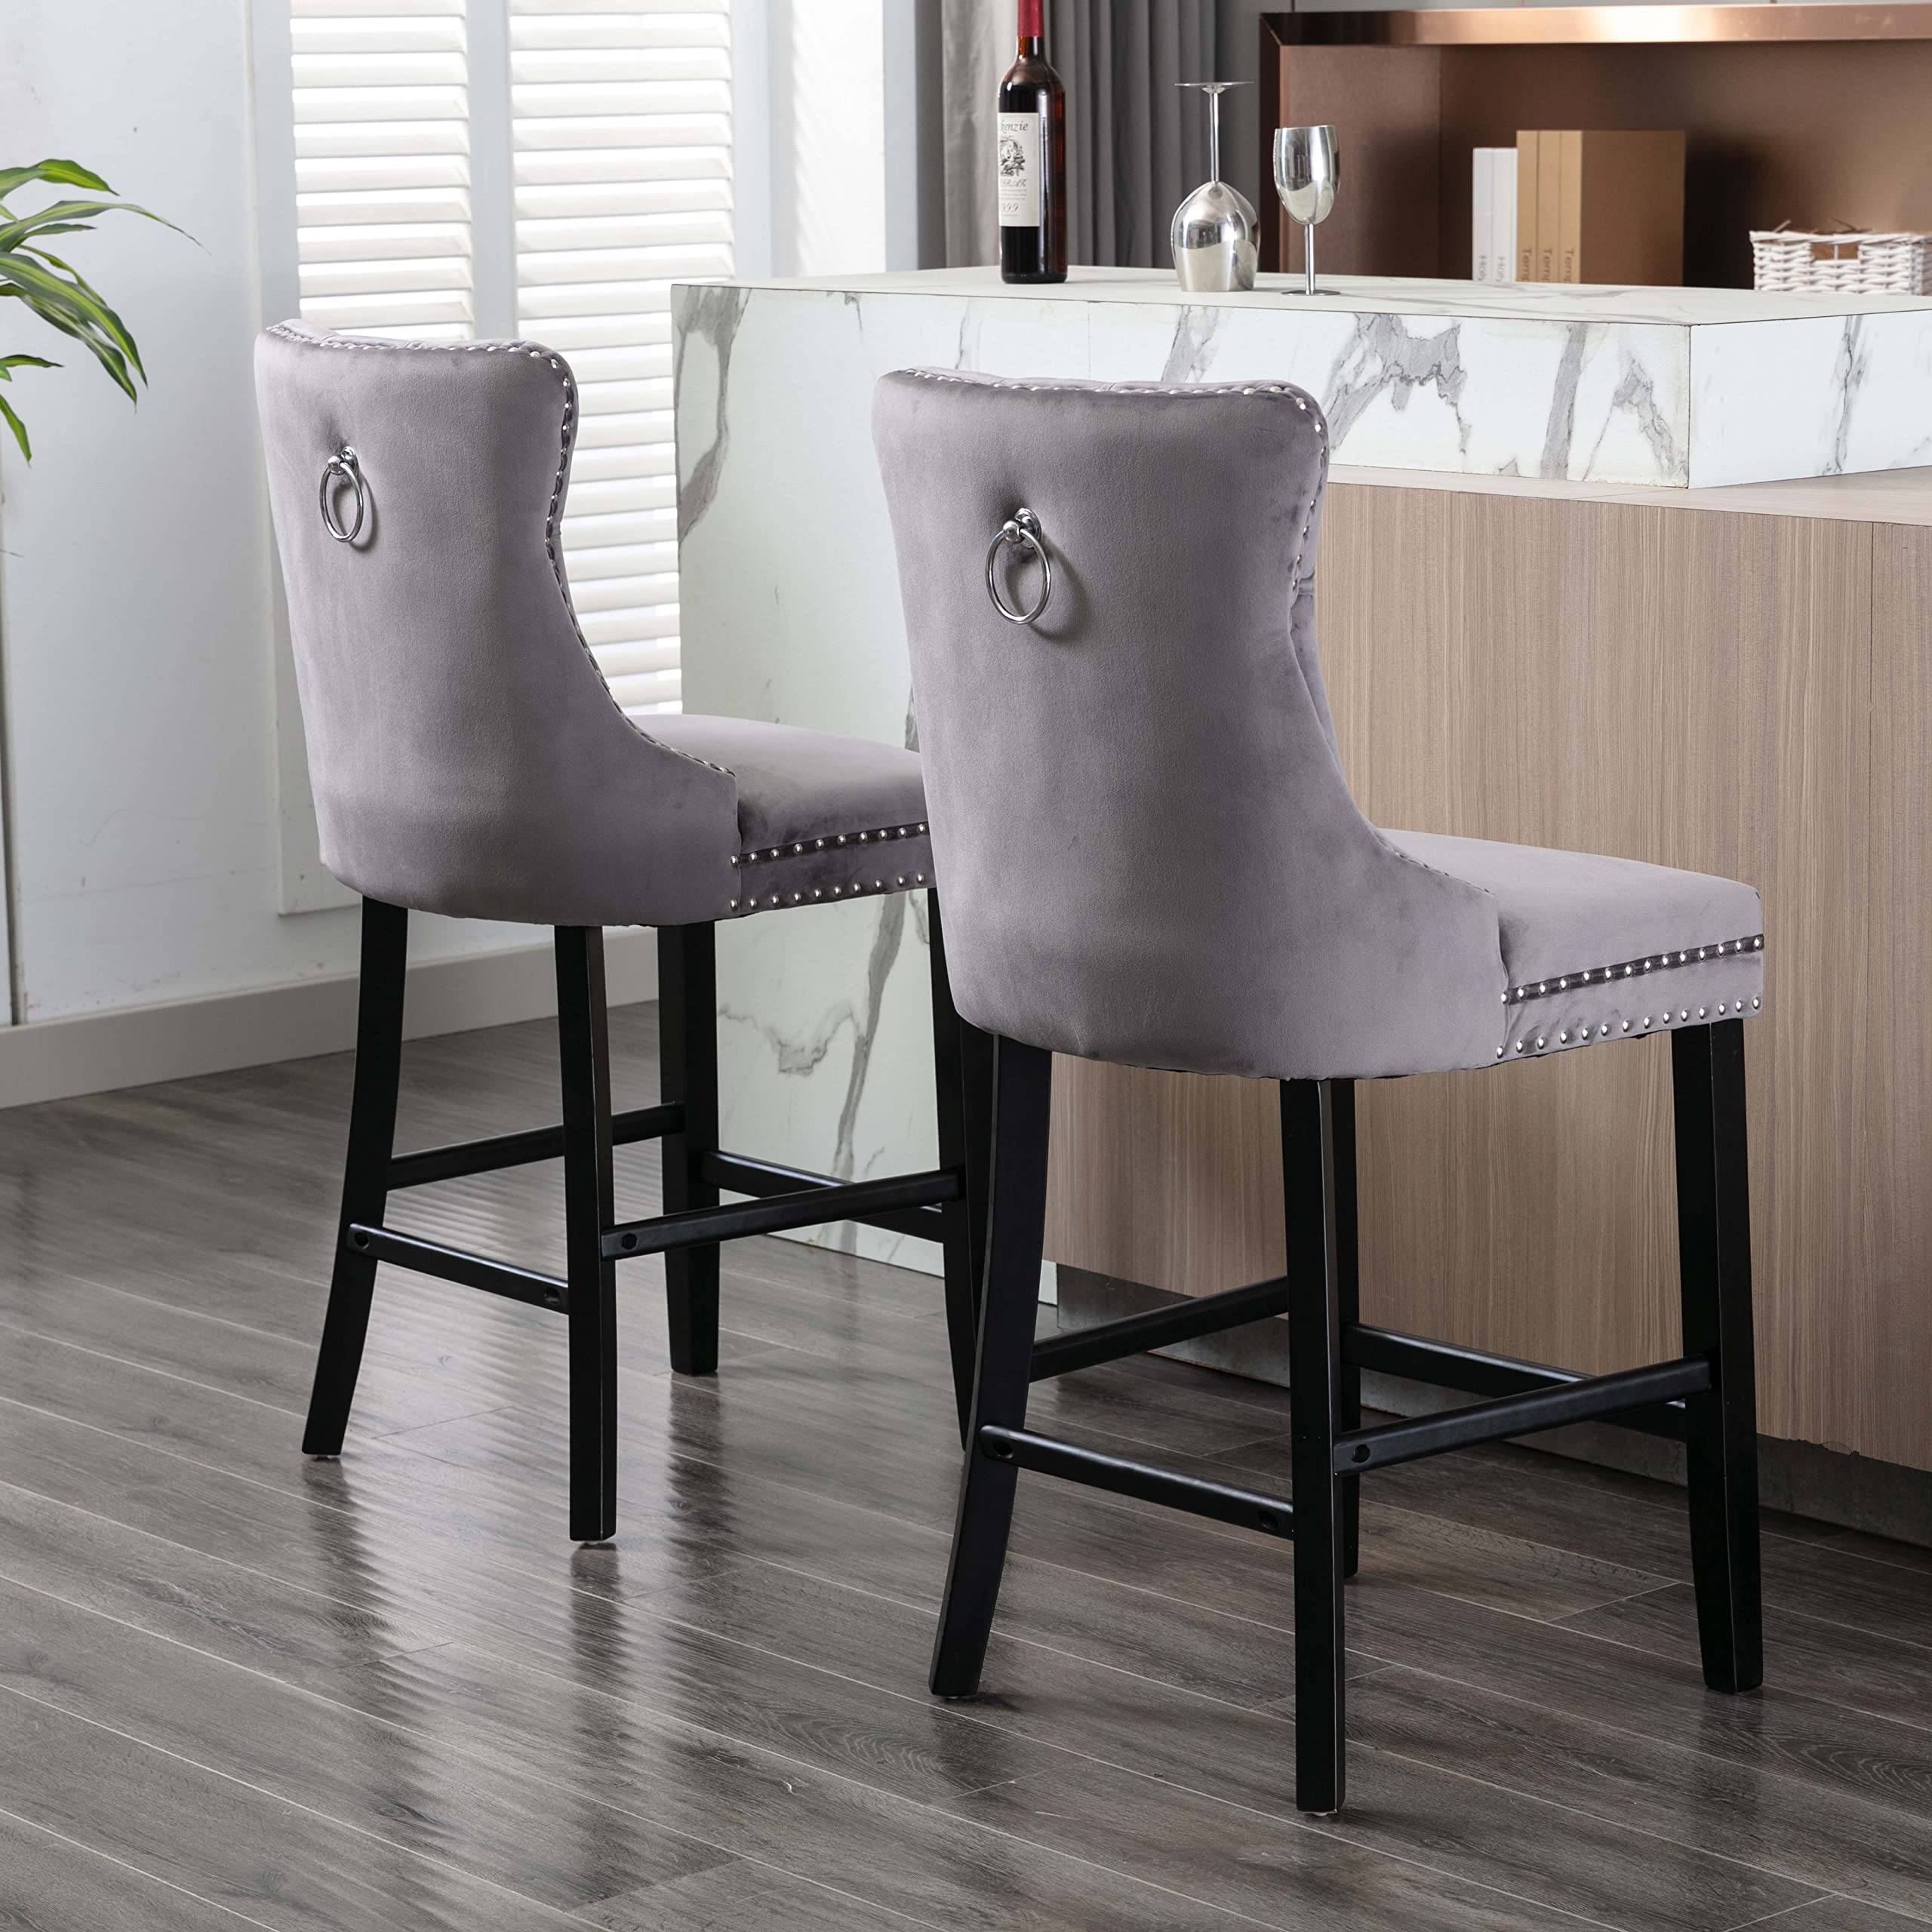 2X Velvet Bar Stools with Studs Trim Wooden Legs Tufted Counter Chairs Kitchen-Gray Odin Furniture